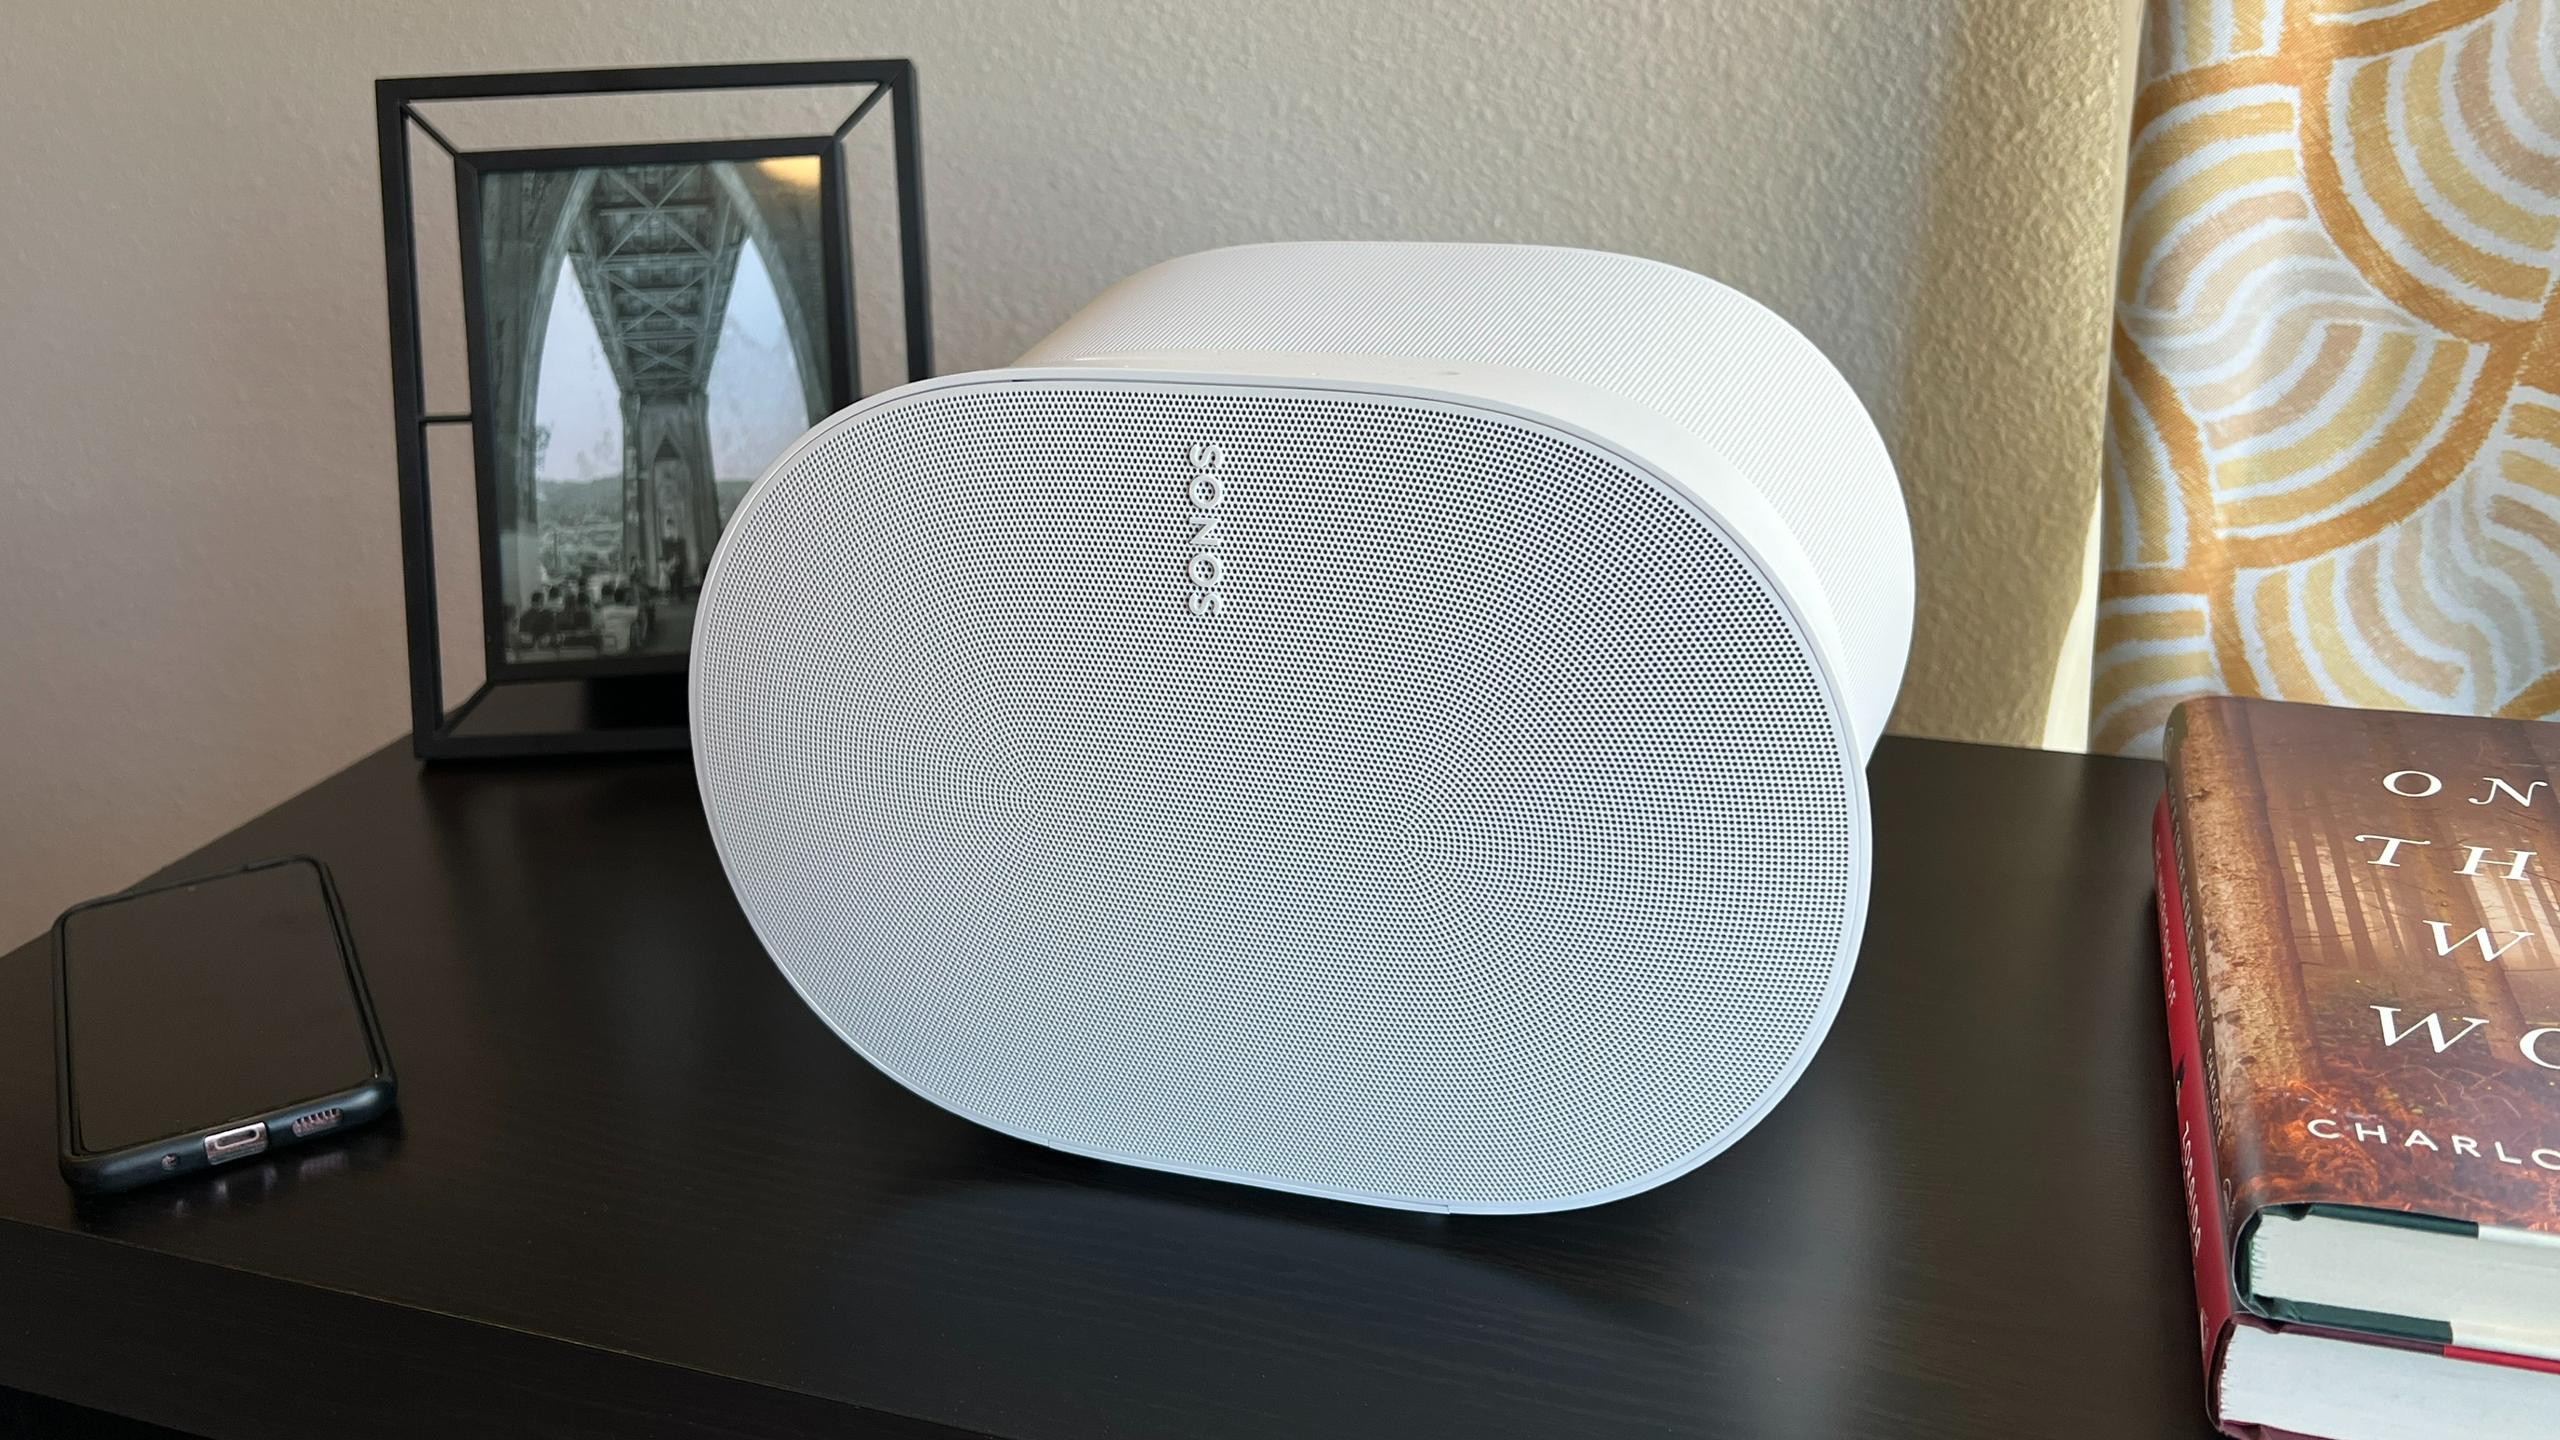 The Sonos Era 300 sits on a black record stand next to books and a phone.